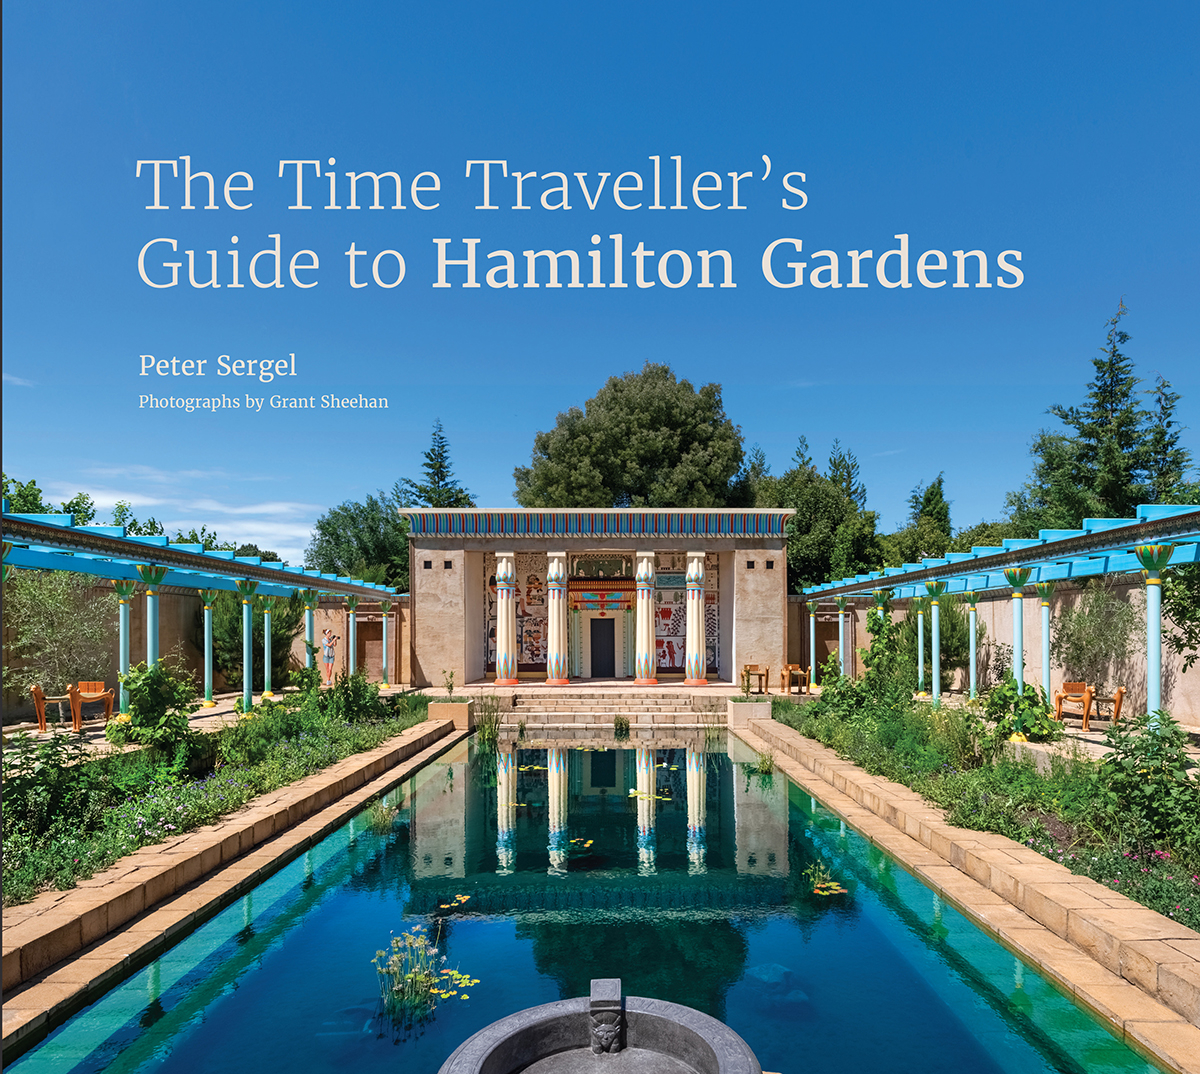 A book cover with the text The Time Traveller's Guide to Hamilton Gardens, and the names Peter Sergel, and Grant Sheehan. The text is over an image of a faux Roman Bath with a large pool surrounded by columns.